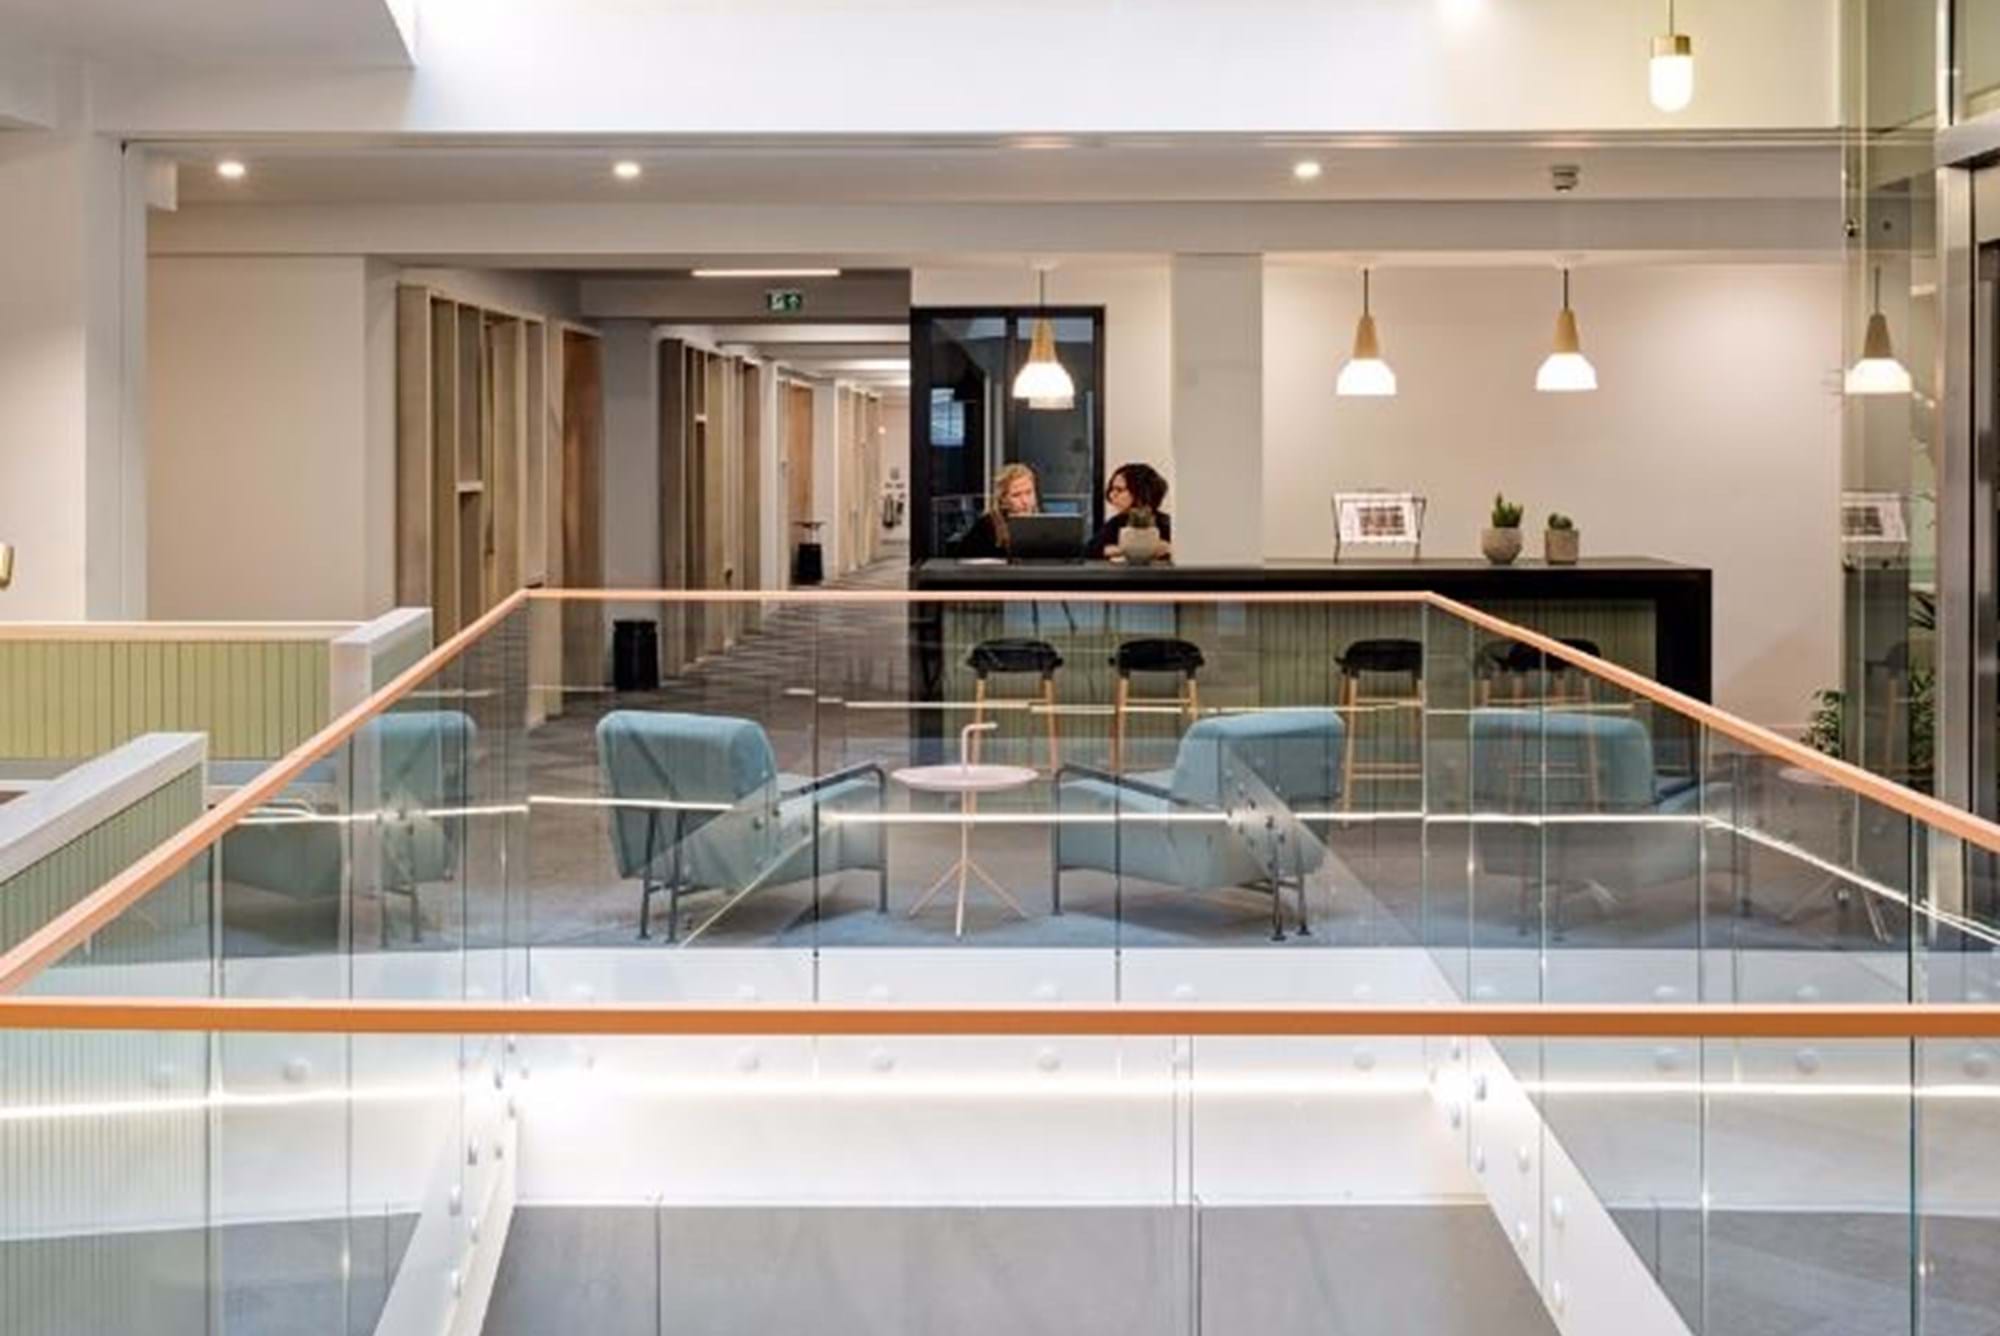 Modus Workspace office design, fit out and refurbishment - TOG - Wimpole Street - TOG Wimpole St 17 highres sRGB.jpg